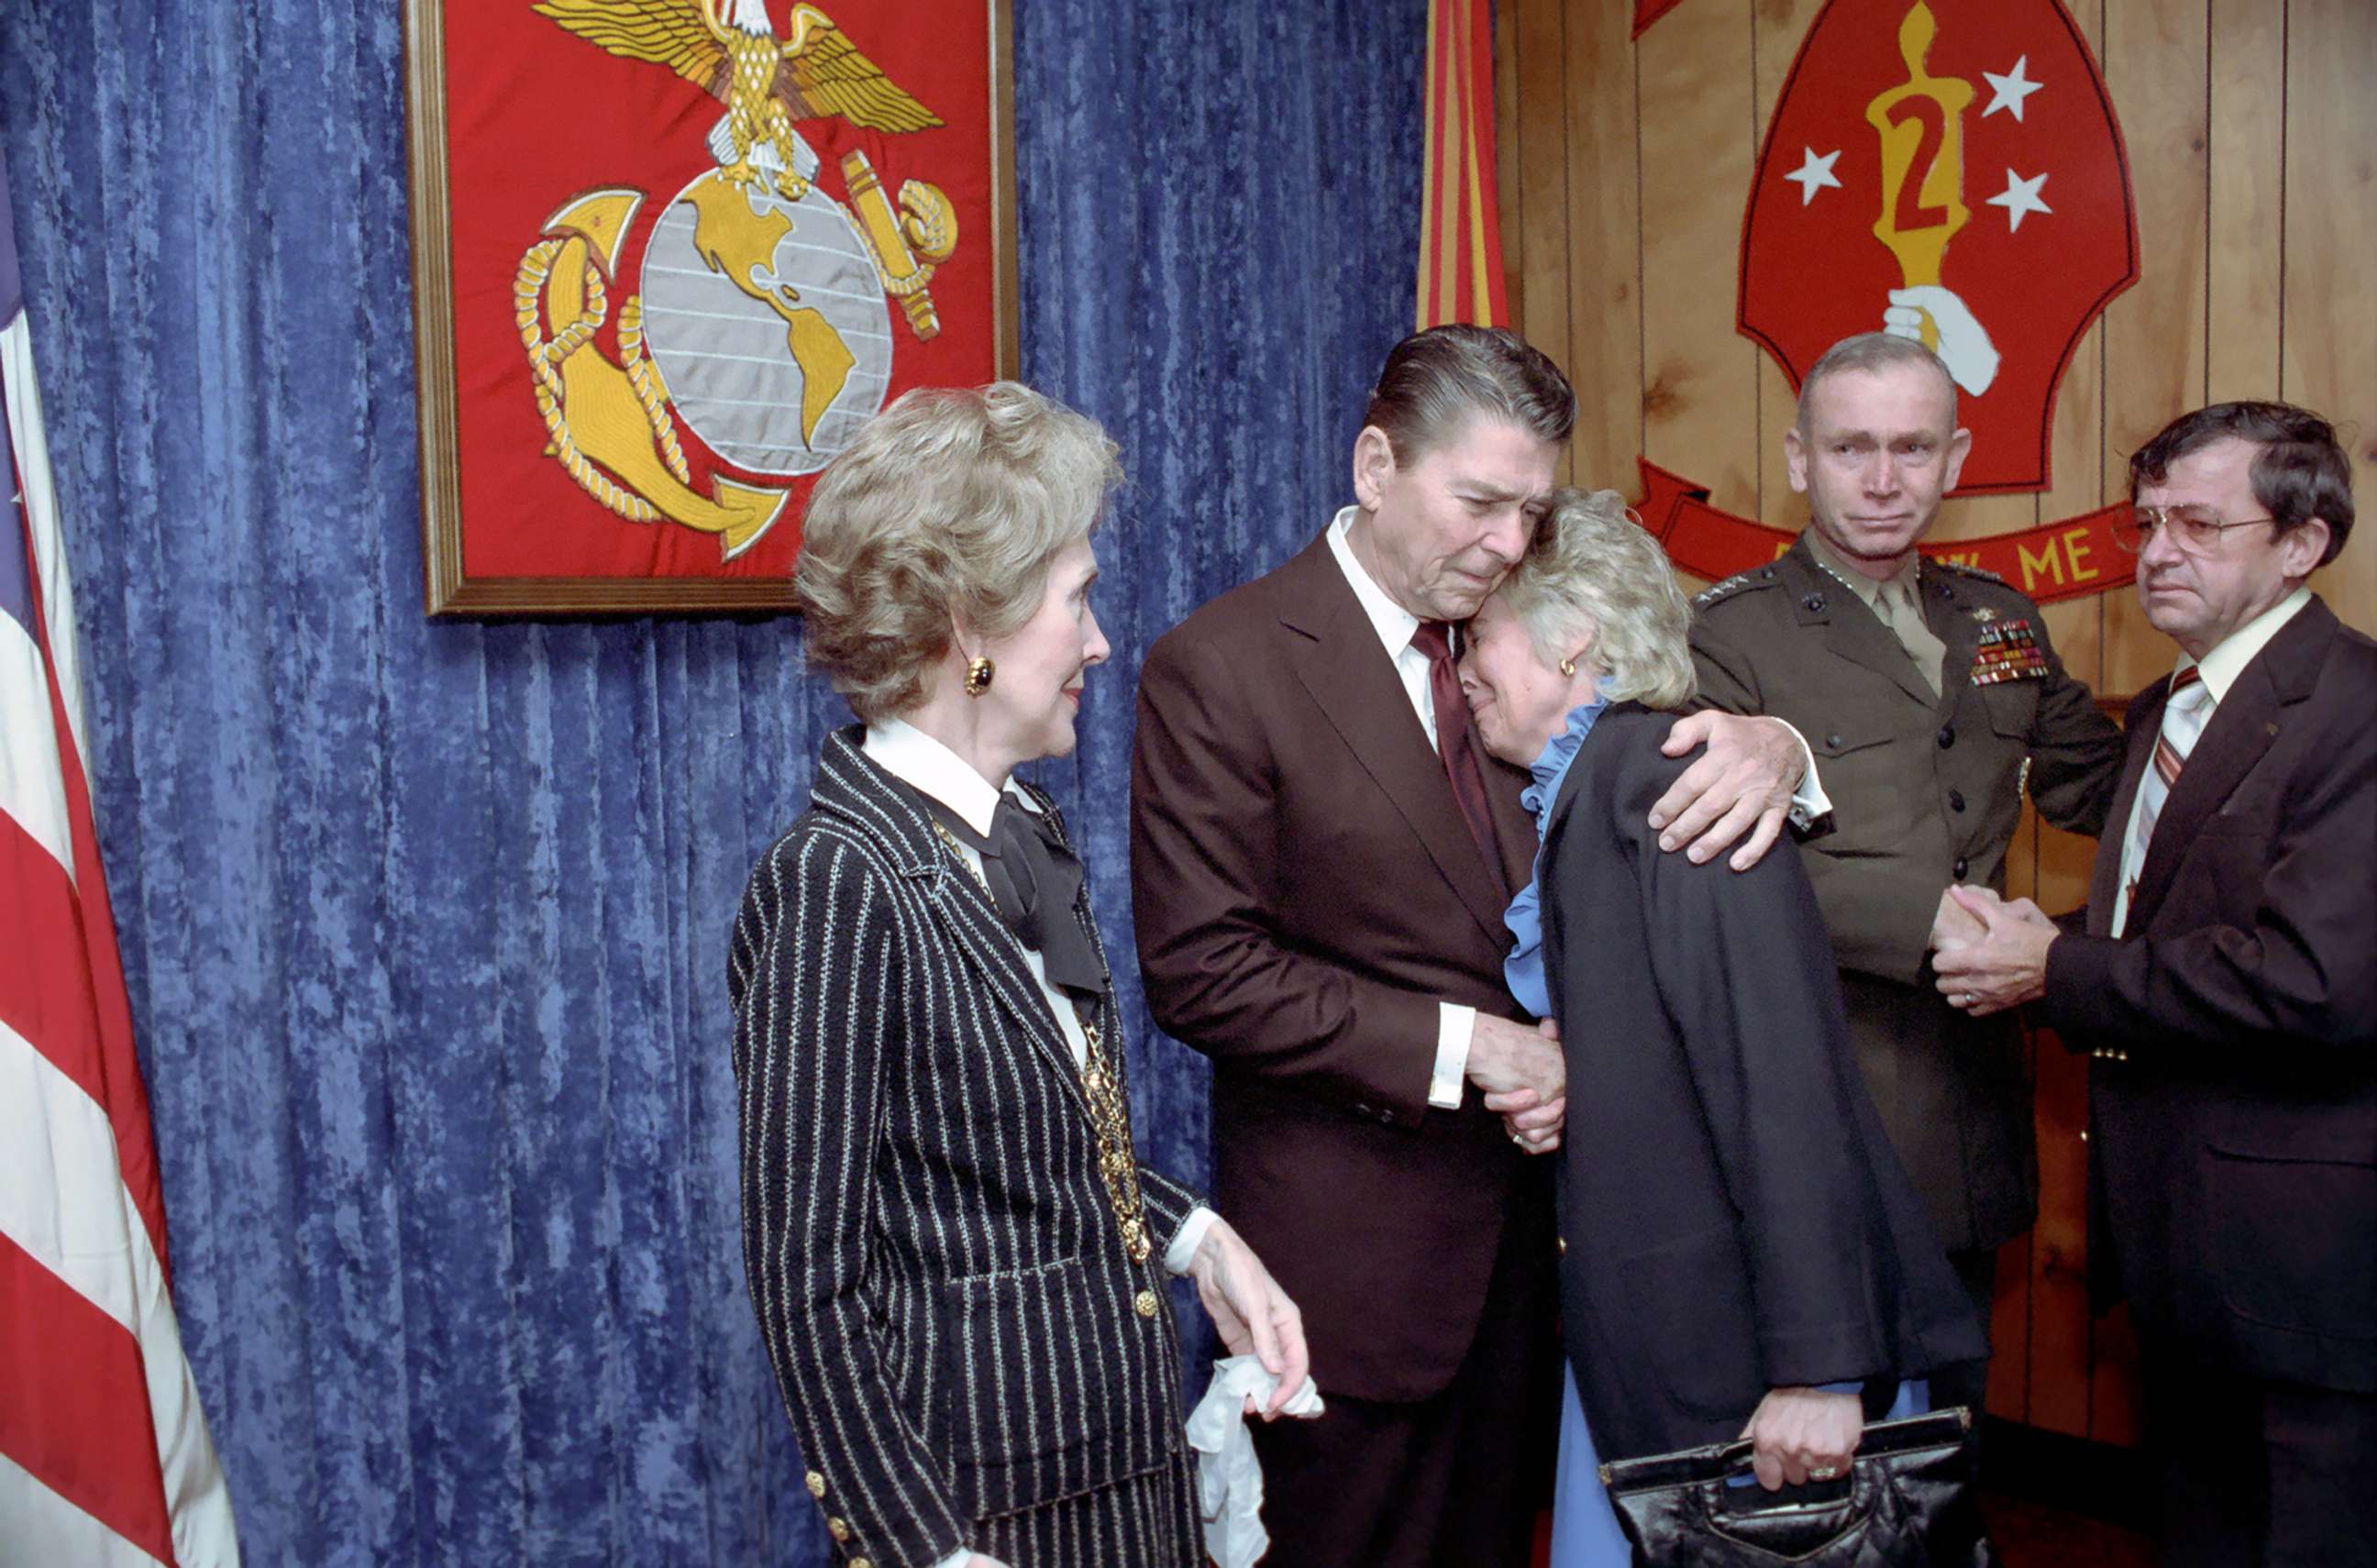 PHOTO: President Reagan consoles a mourner during a memorial service for servicemen killed and wounded in Lebanon and Grenada at the Marine Headquarters Building at Camp Lejeune in North Carolina, Nov. 4, 1983.